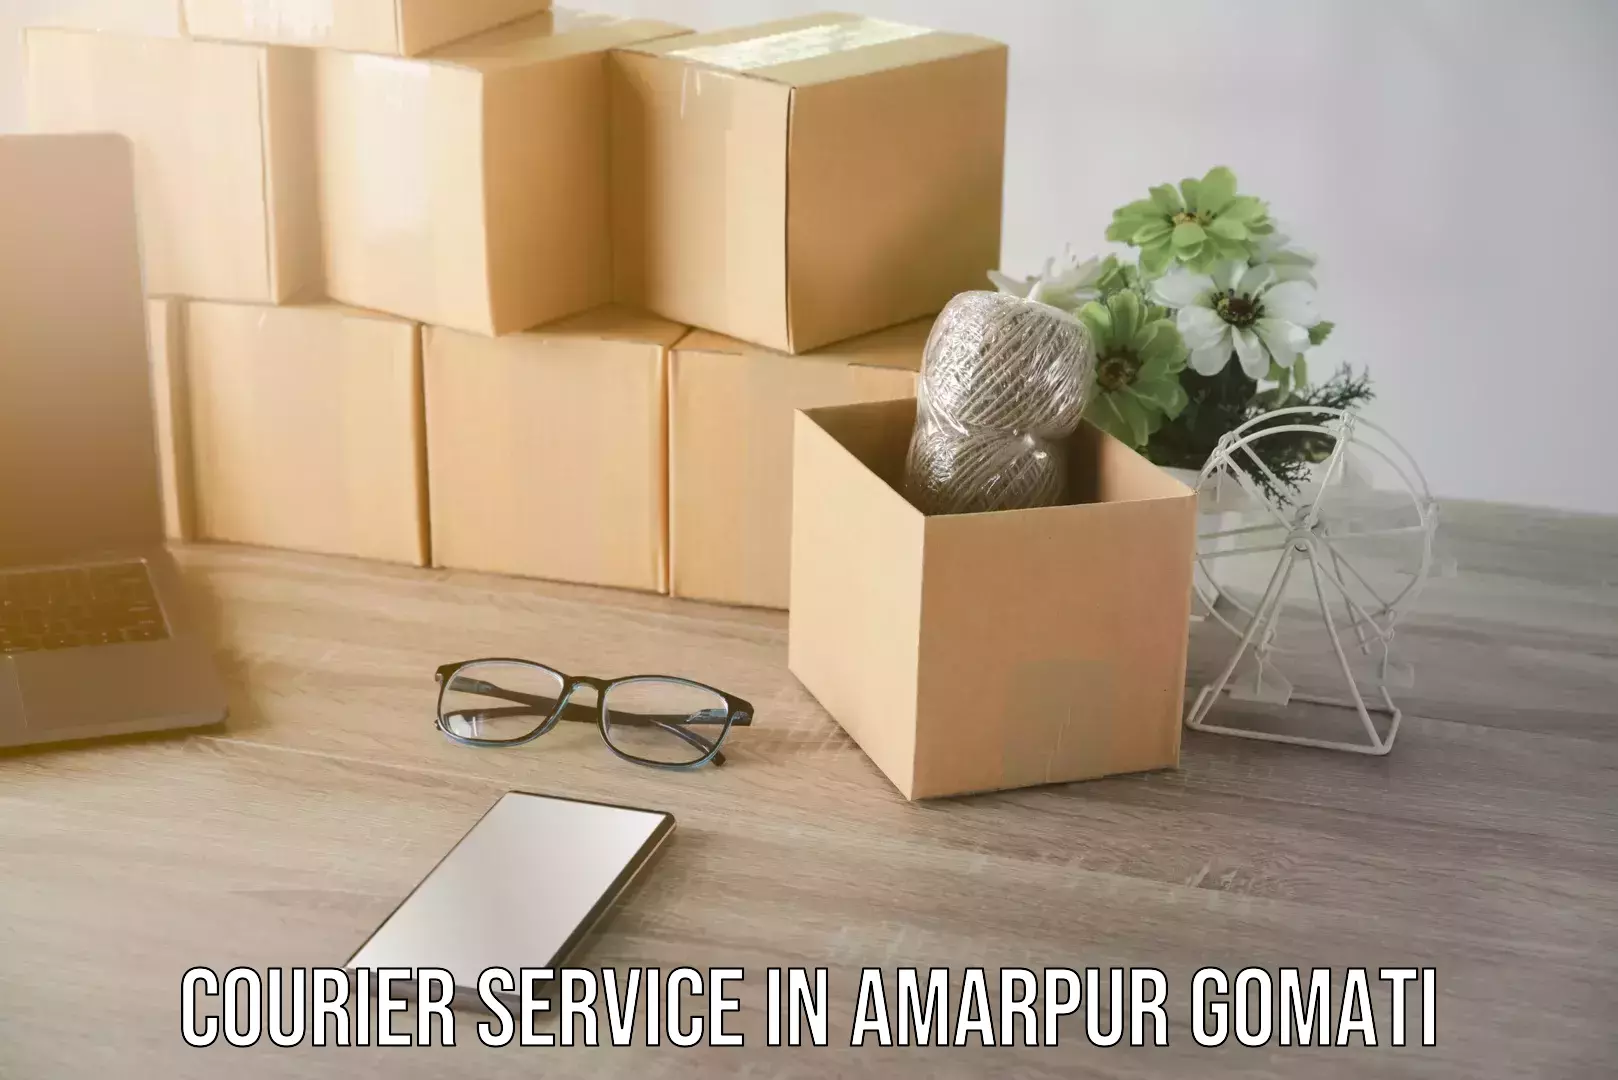 Express delivery capabilities in Amarpur Gomati